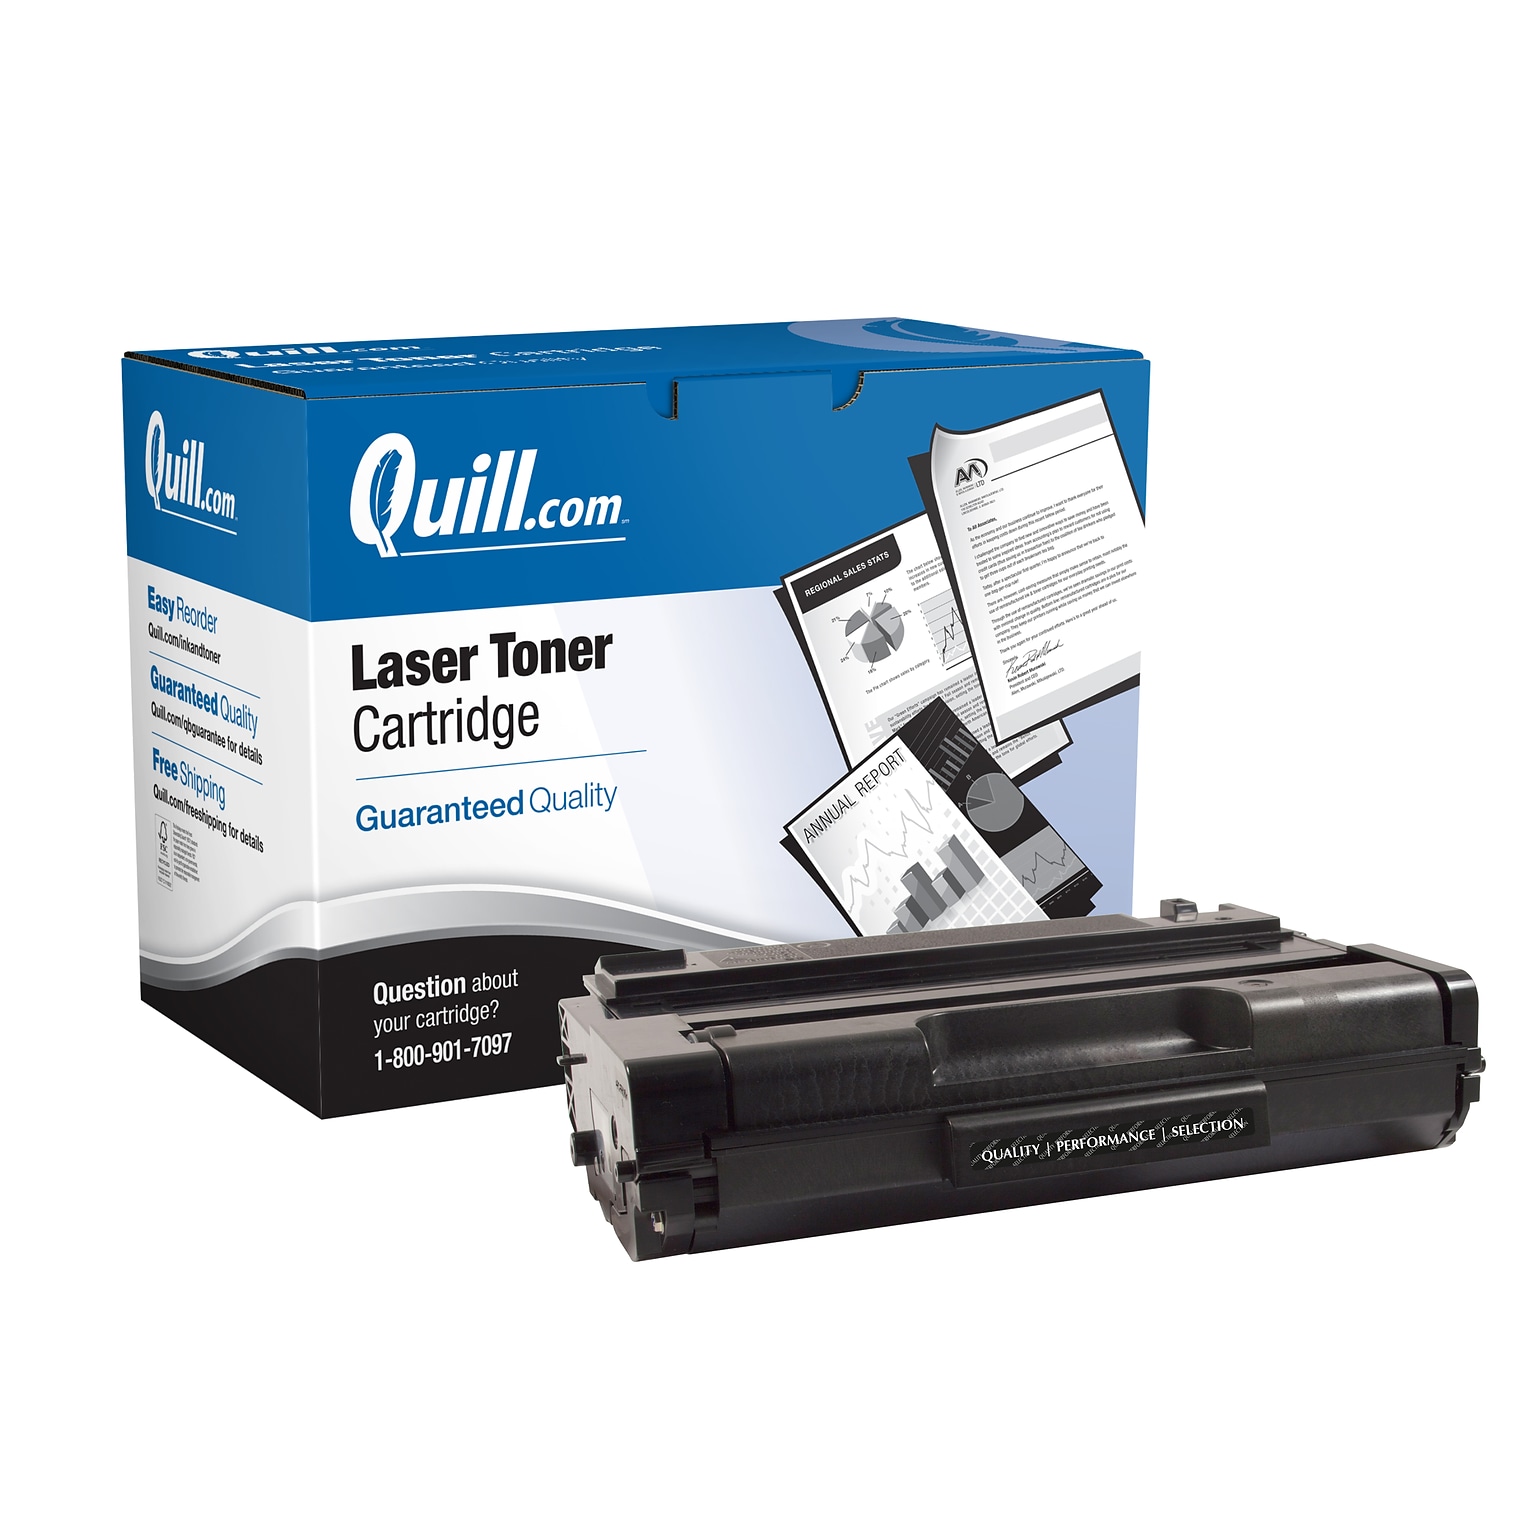 Quill Brand® Ricoh SP3400 Remanufactured Black Laser Toner Cartridge, Extended Yield, Universal (406465)